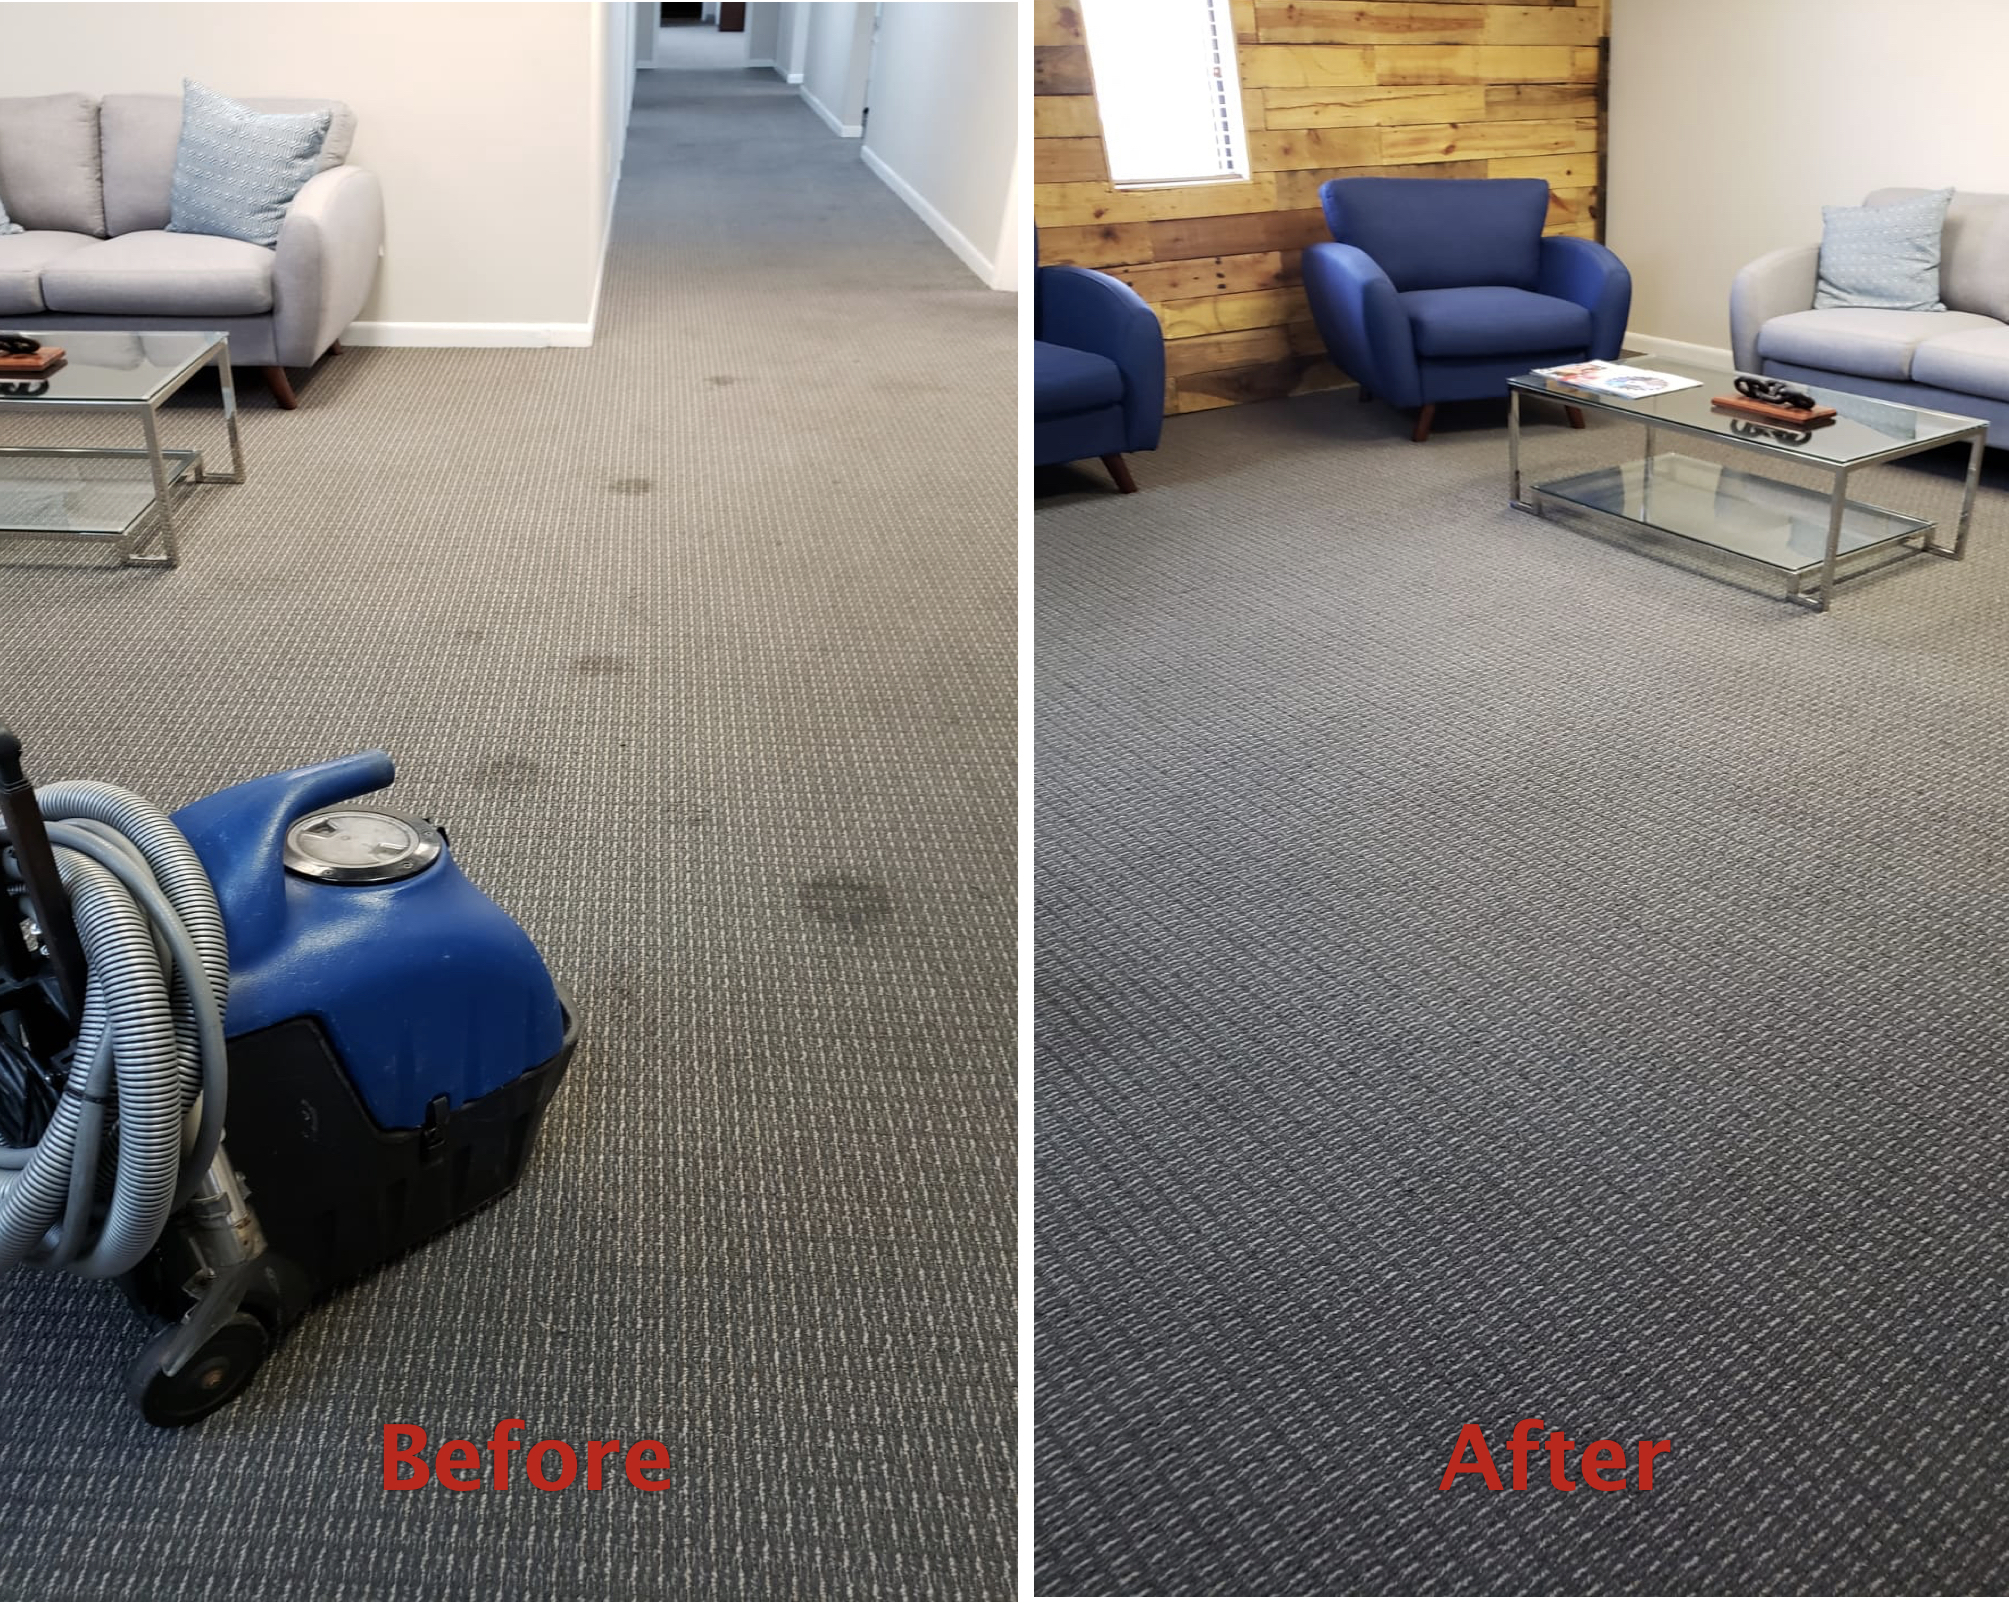 Commercial Carpet Cleaning Services | All Building Cleaning Corp